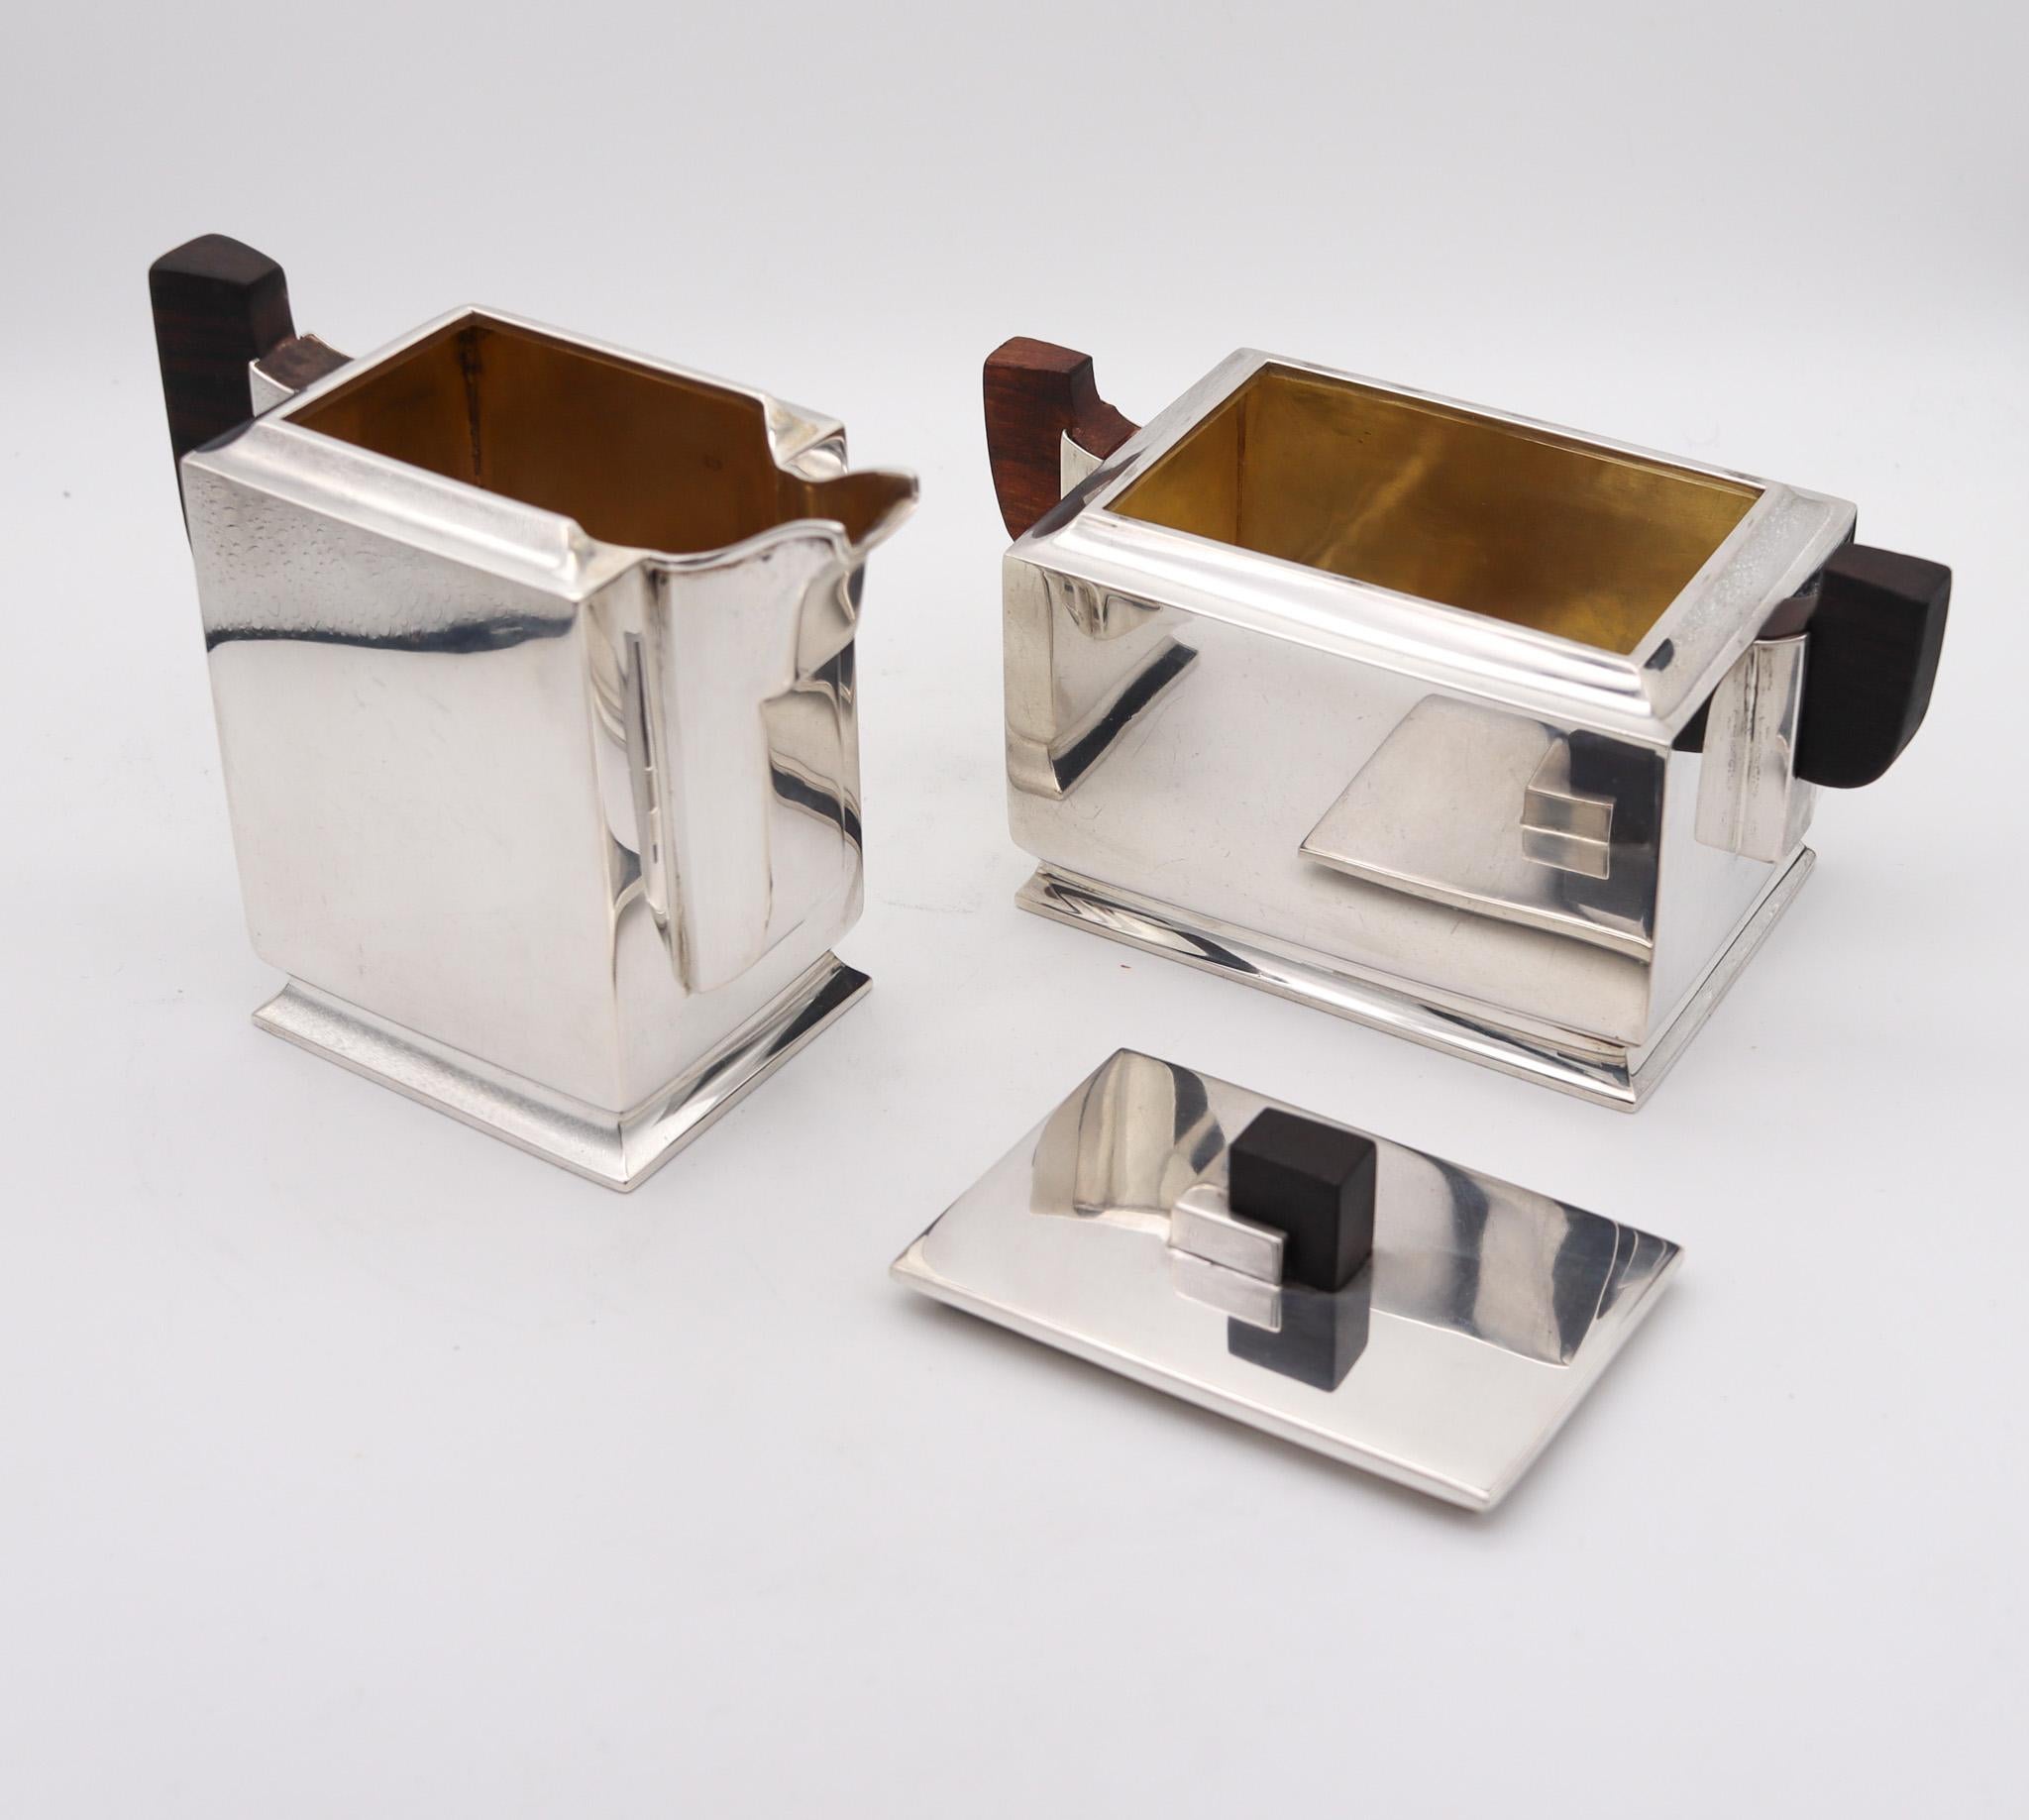 Sweden 1931 Art Deco Bauhaus Geometric Coffee Set In Sterling Silver And Ebony For Sale 4